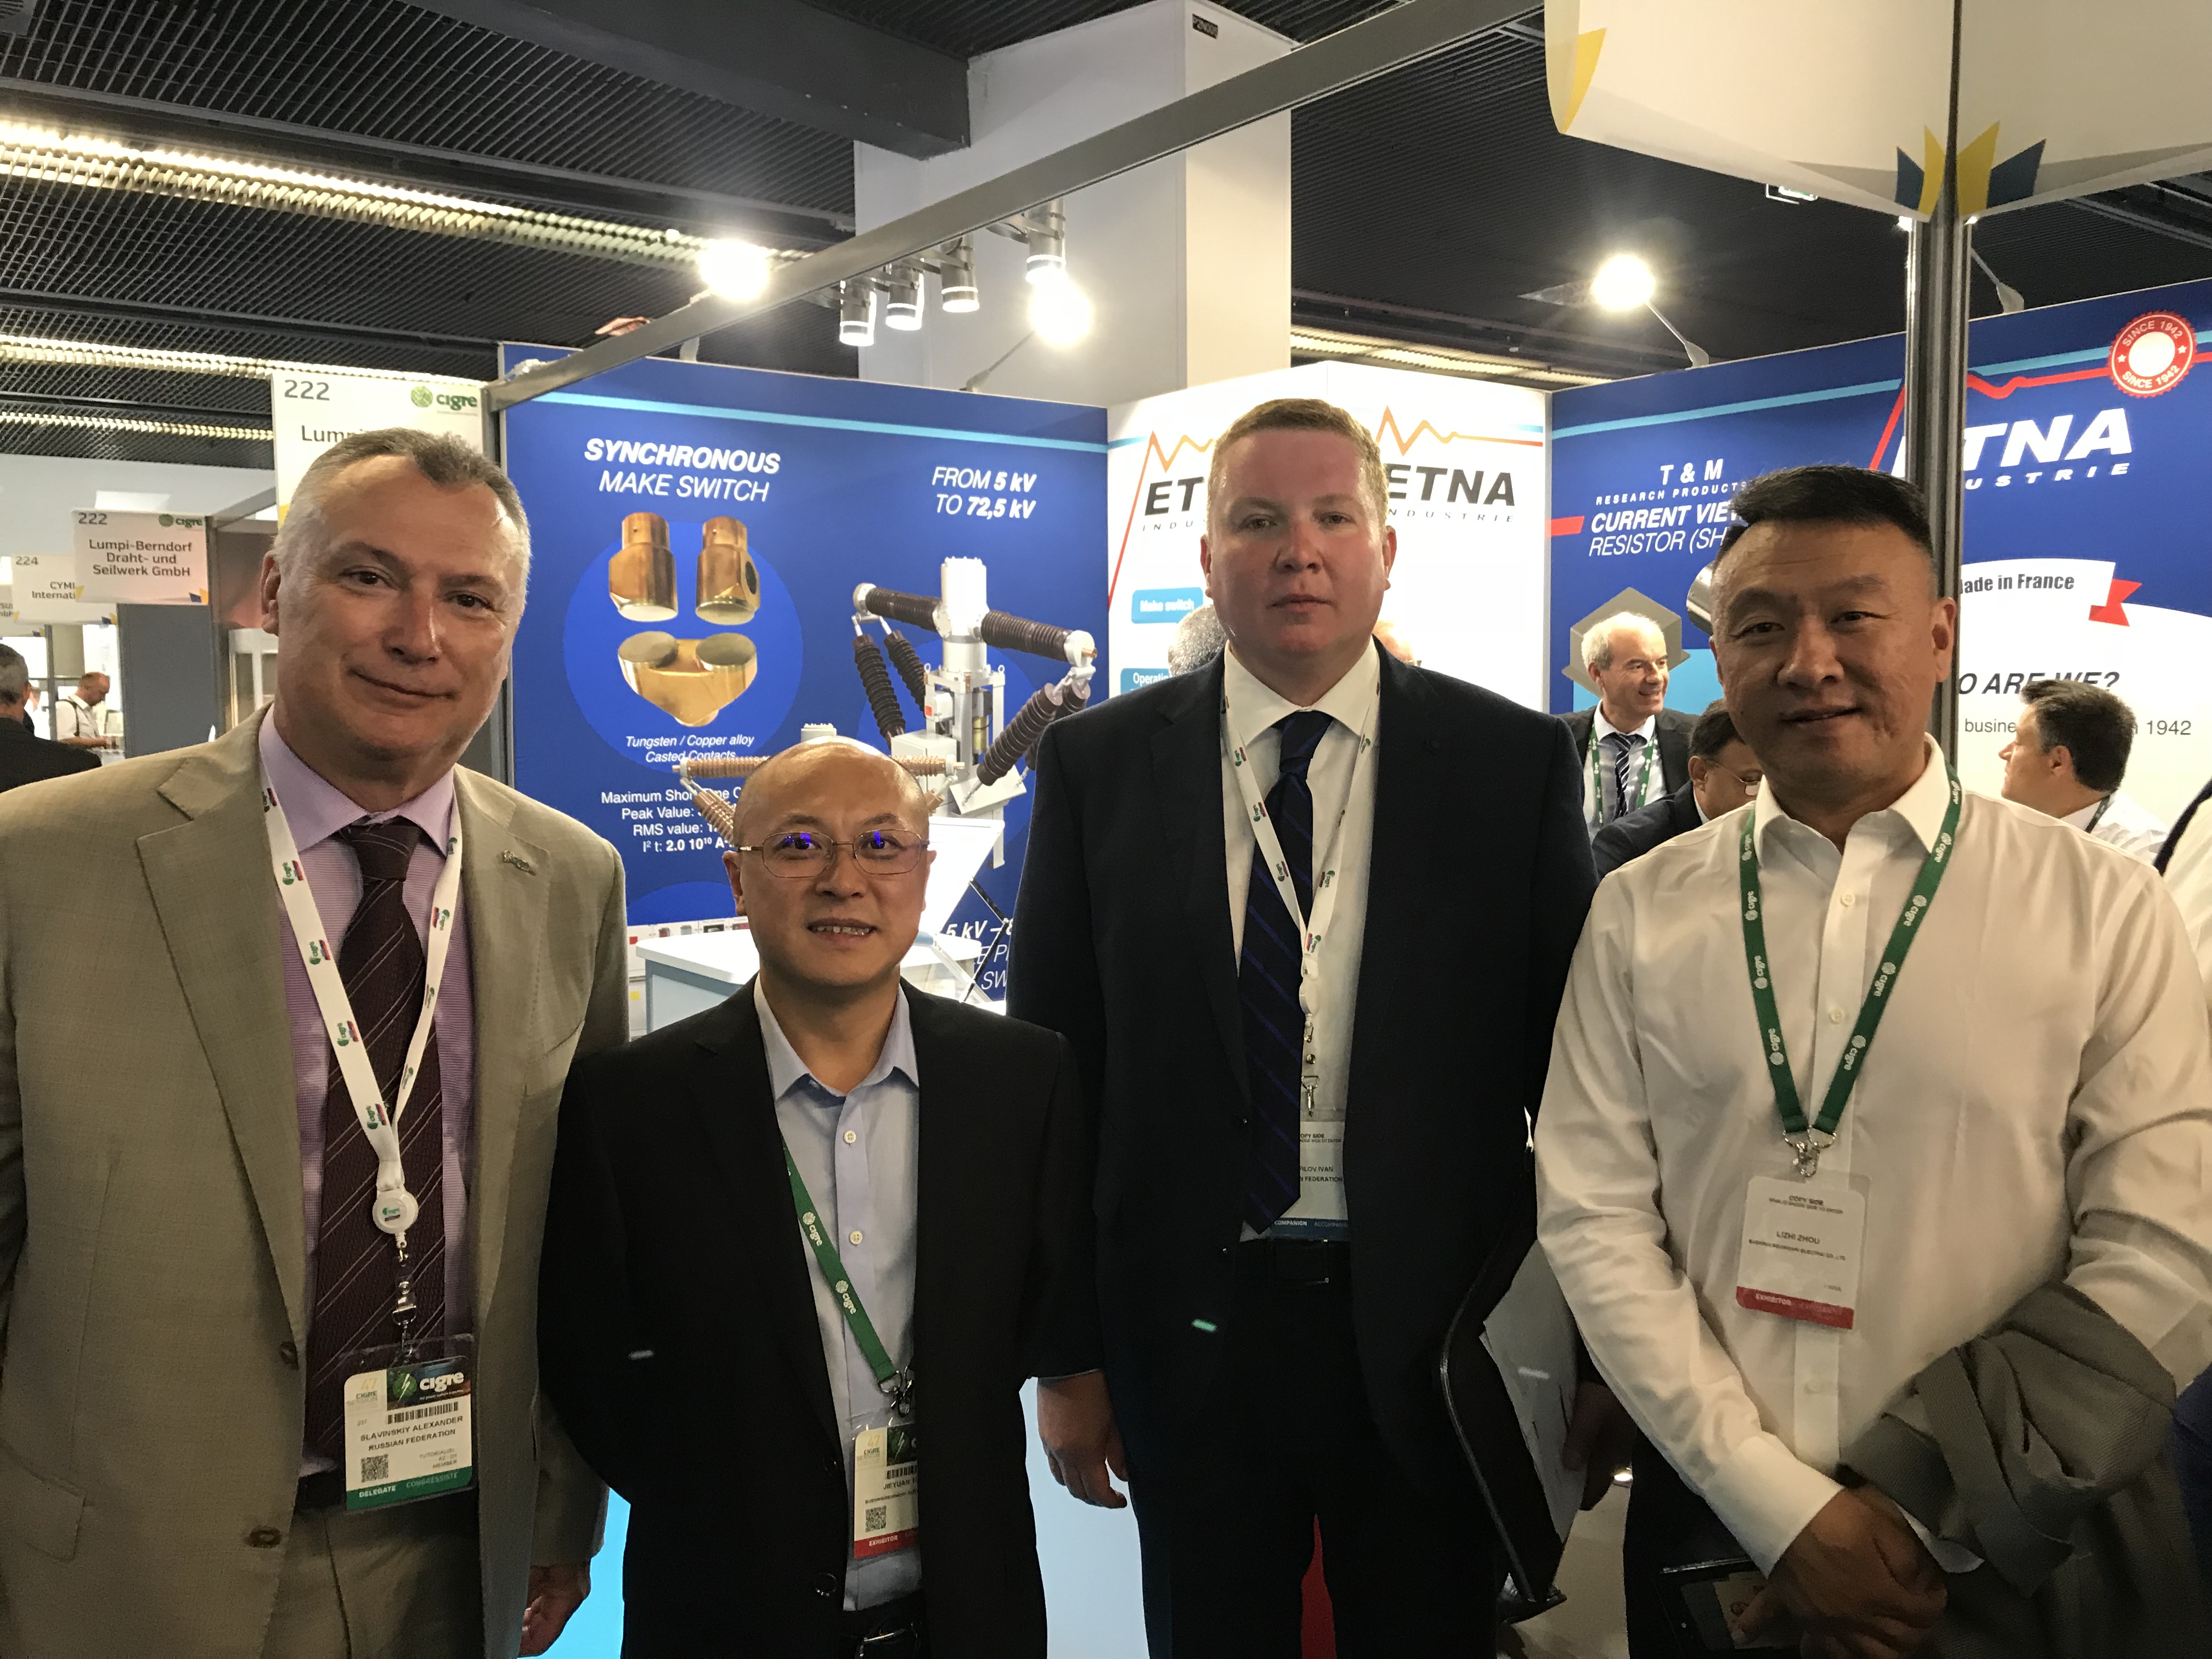 Meeting with management representatives of BHHV, from left to right: Alexander Slavinsky, Director of BHHV Jieyuan Tian, Ivan Panfilov, representative of BHHV Lizhi Zhou